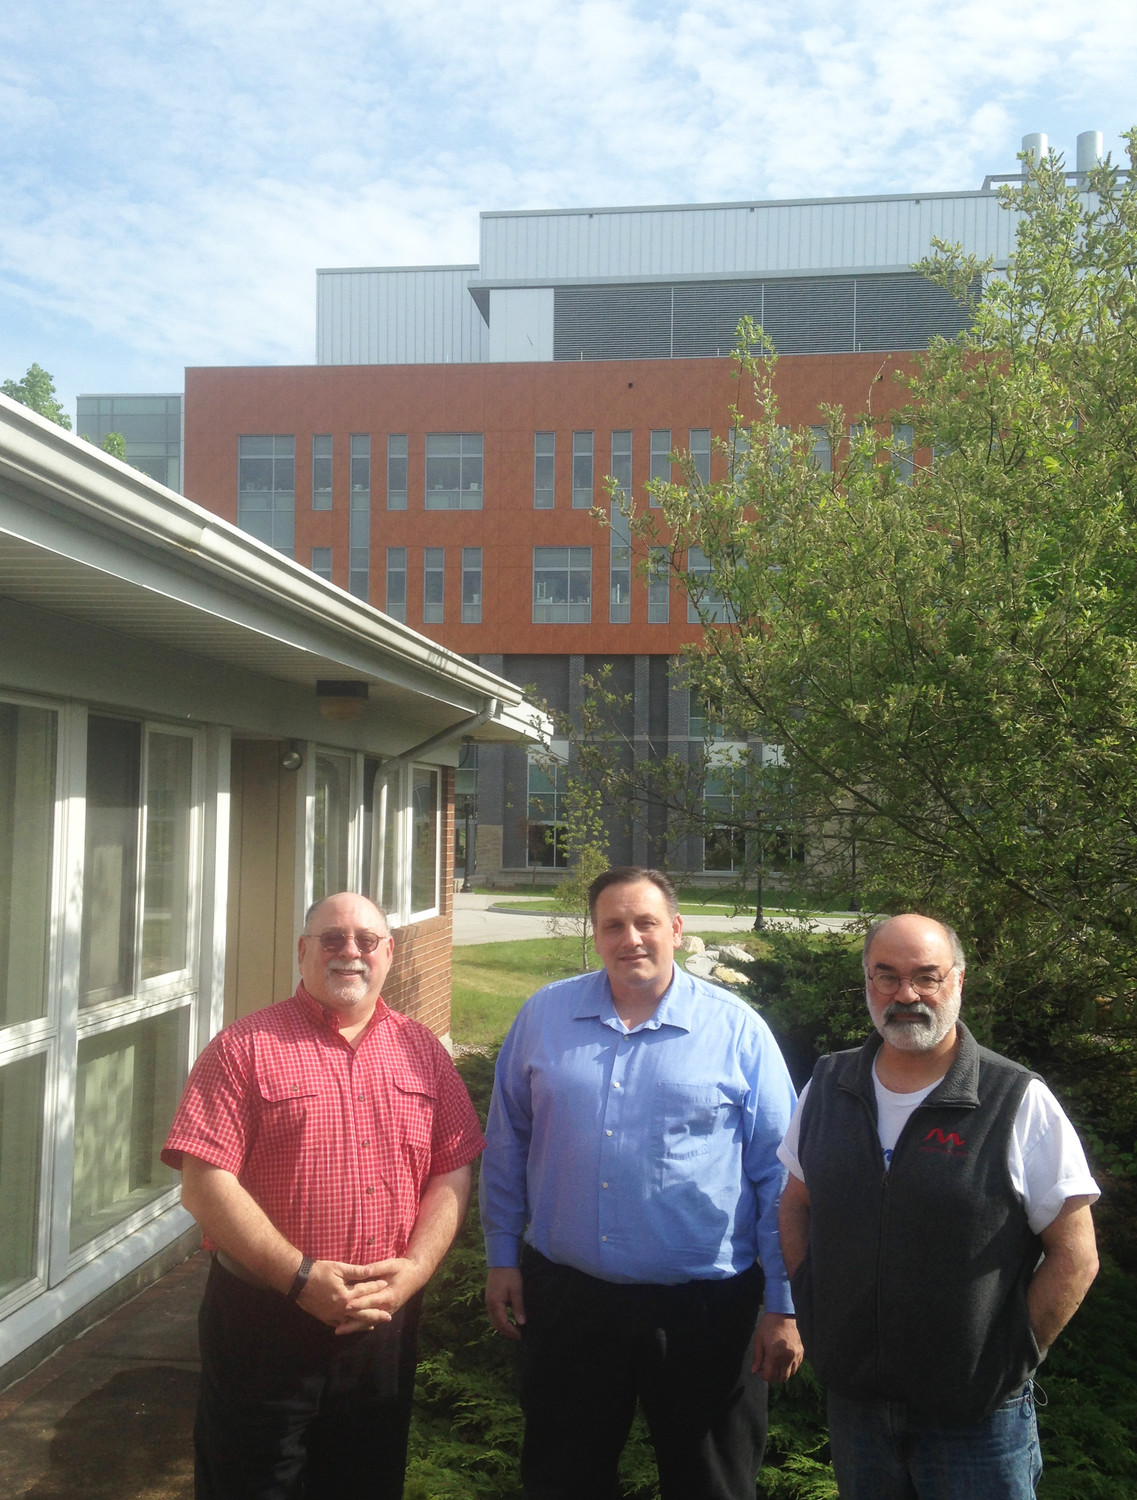 The MindImmune team: Stevin Zorn, CEO, left; Brian Campbell, VP for Pharmacology, center, and Frank Menniti, CSO, right. Missing from photo: Robert Nelson, VP for Exploratory Biology.